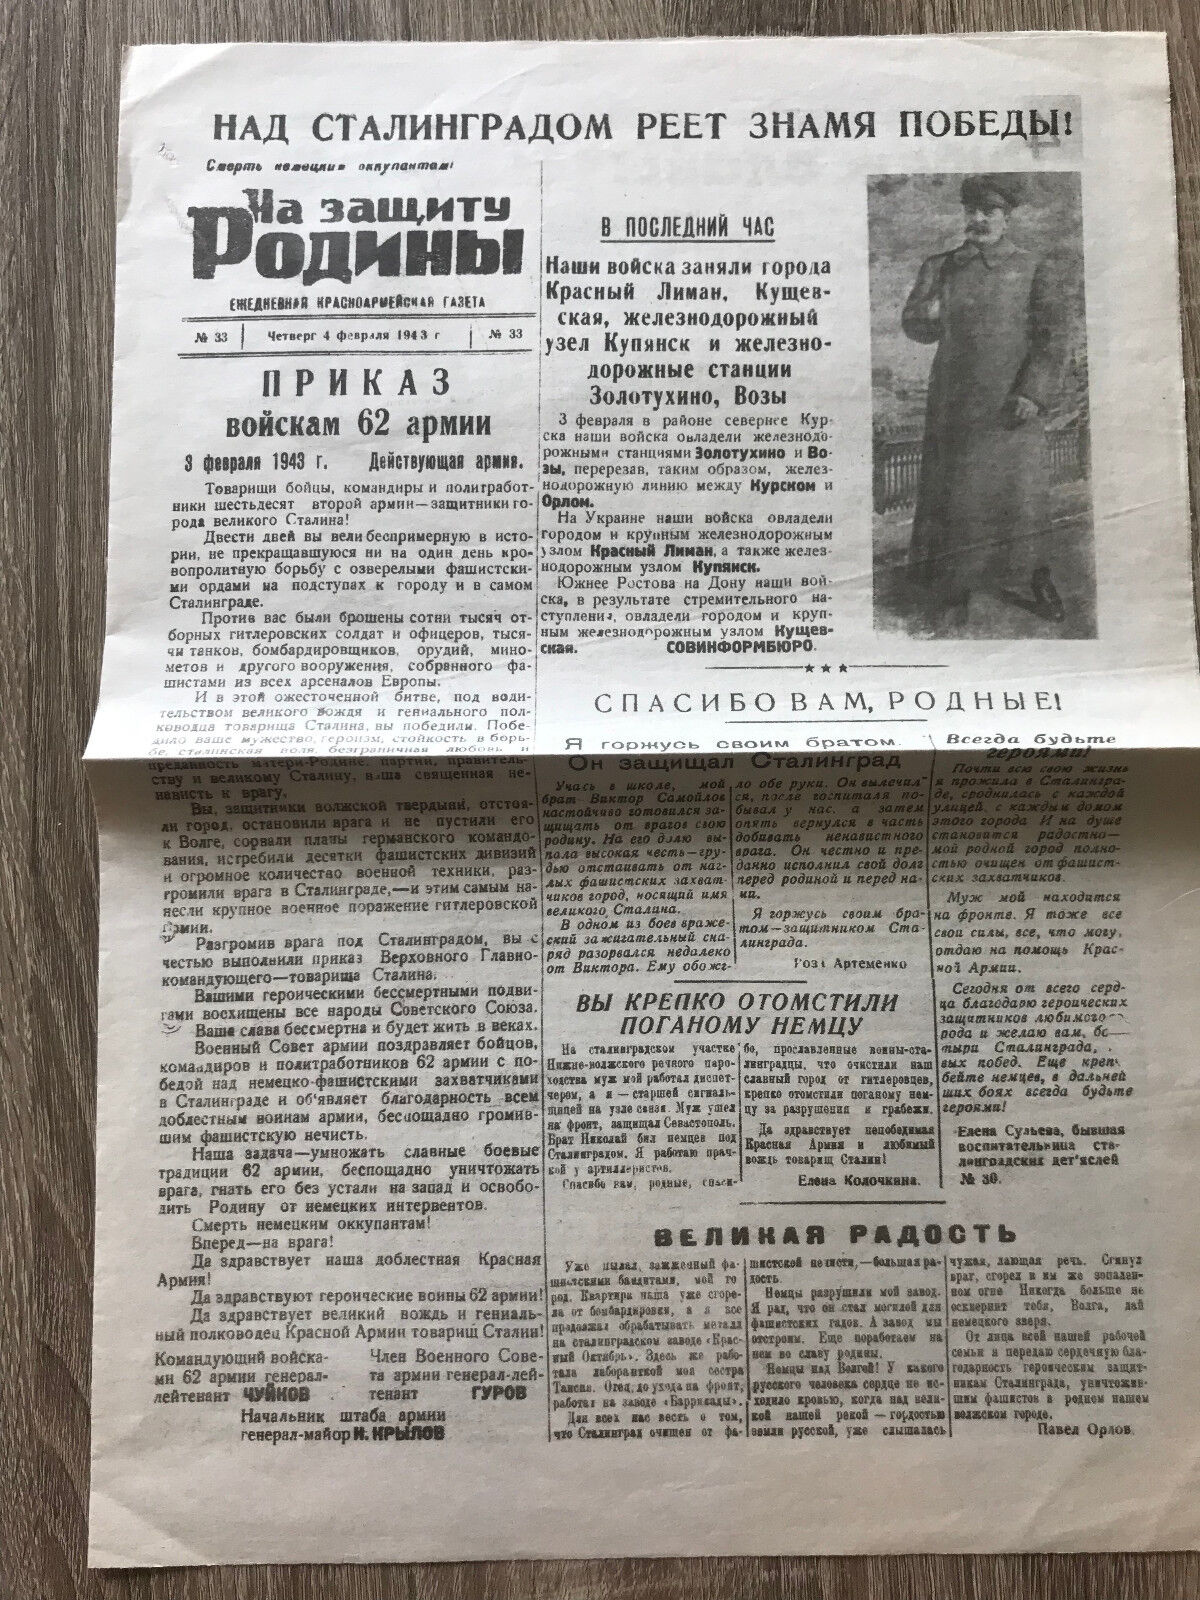 Vintage. Very rare newspaper ending the war with Germany in February of 1943.